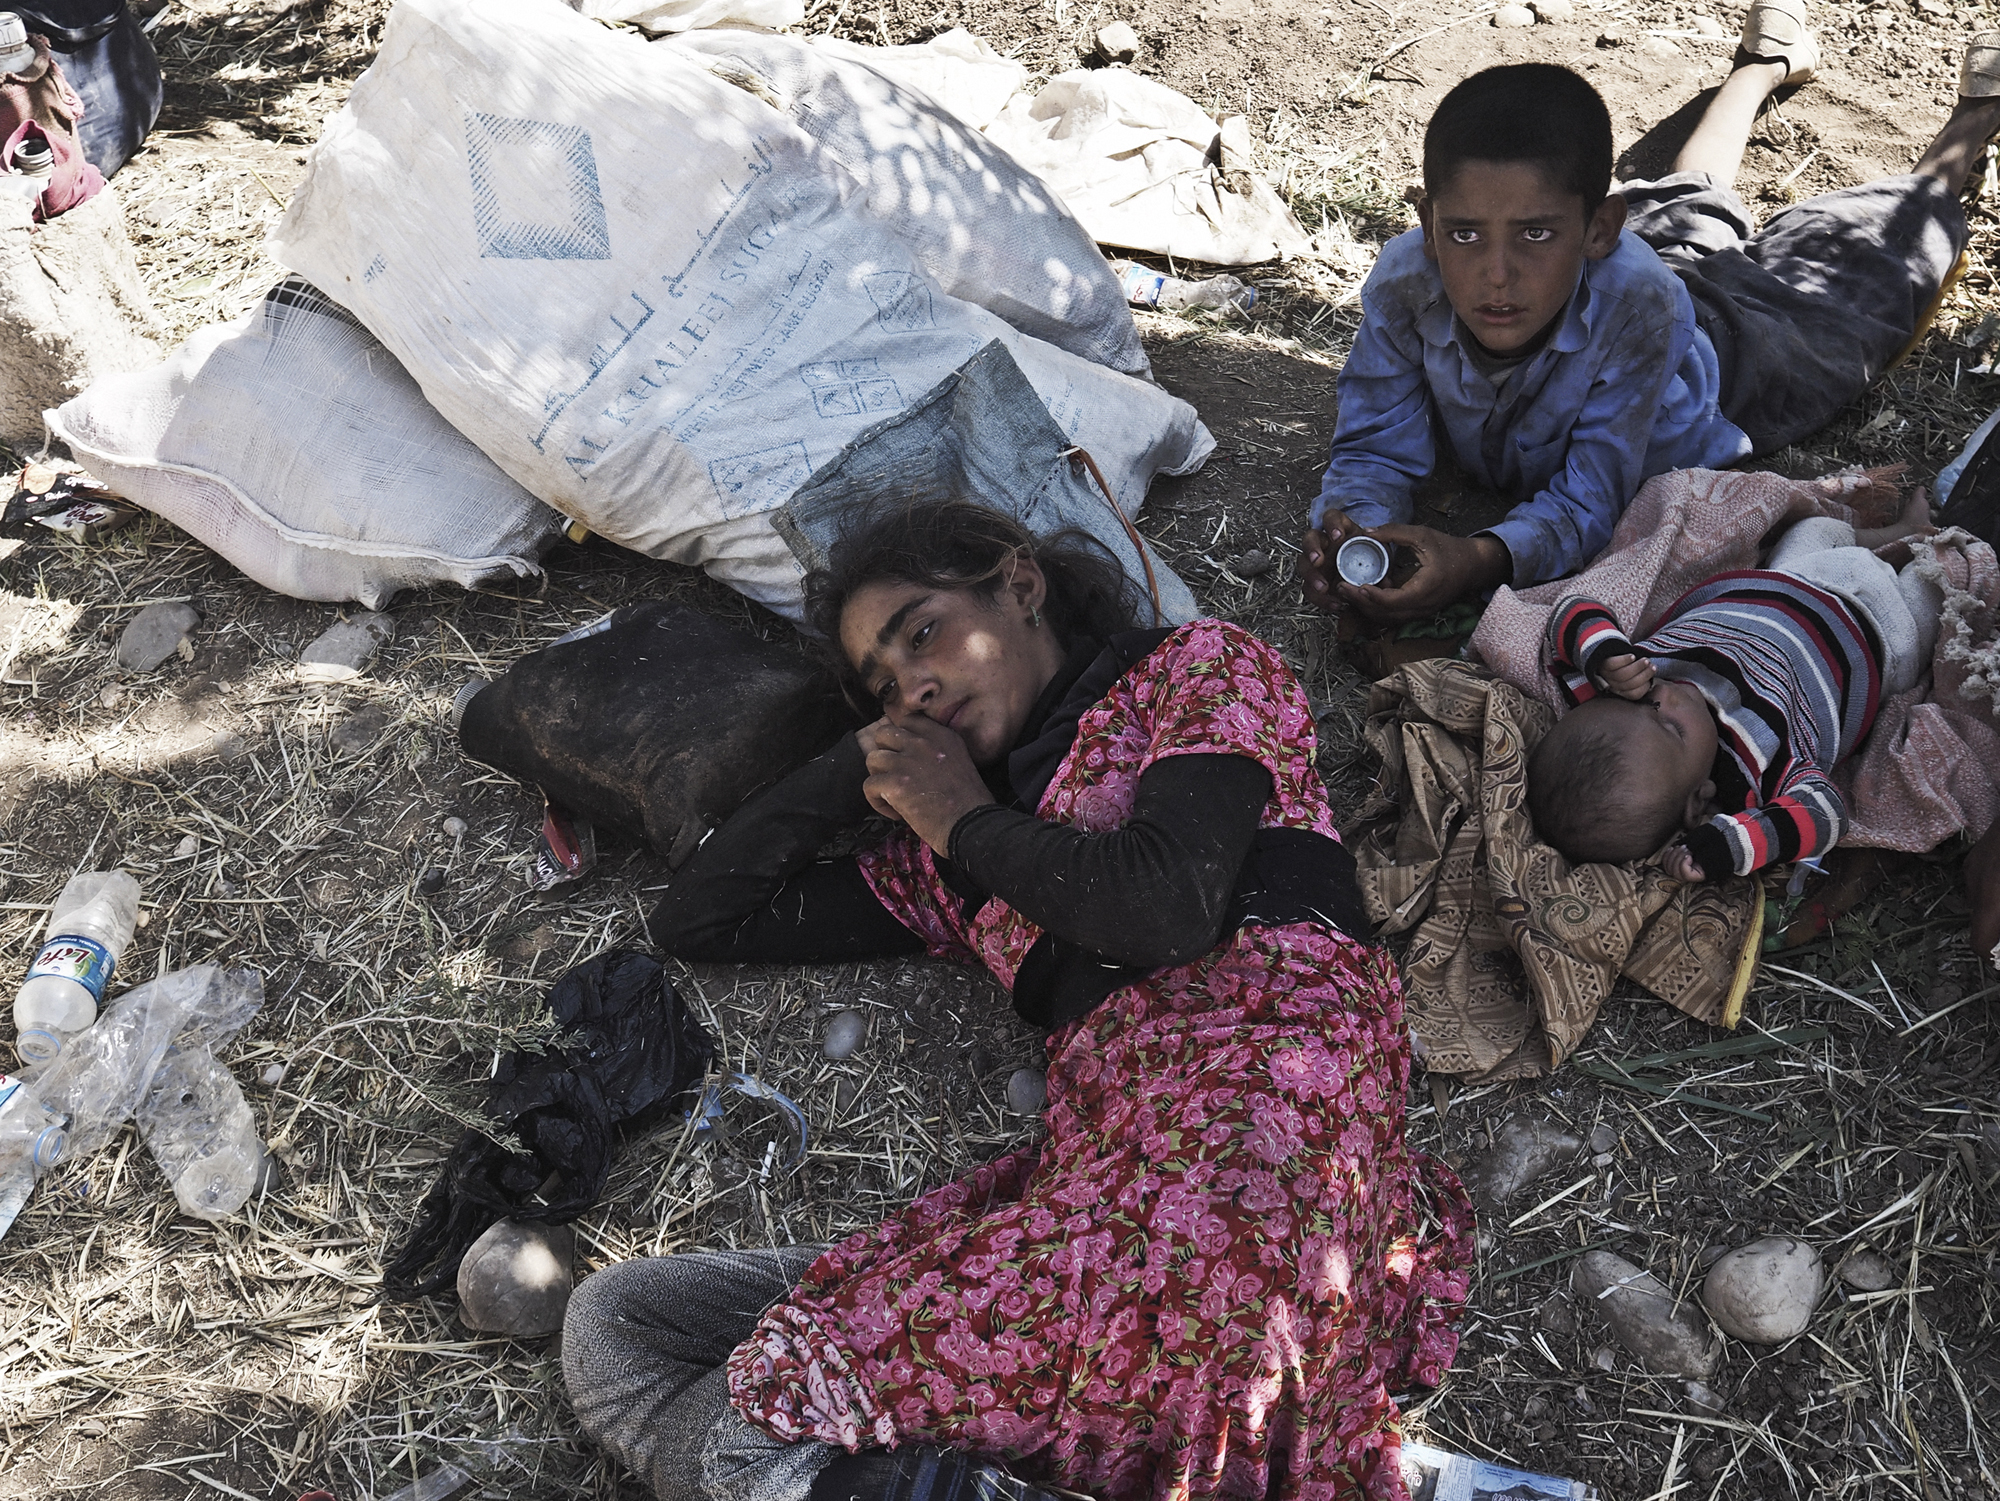 14-year-old Tawaf Ismail, a Yazidi girl from Sinjar, rests next to her brothers after arriving at the Fishkhabur border crossing between Iraq's Dohuk Province and Syria, Aug. 10, 2014. (Moises Saman—Magnum for TIME)